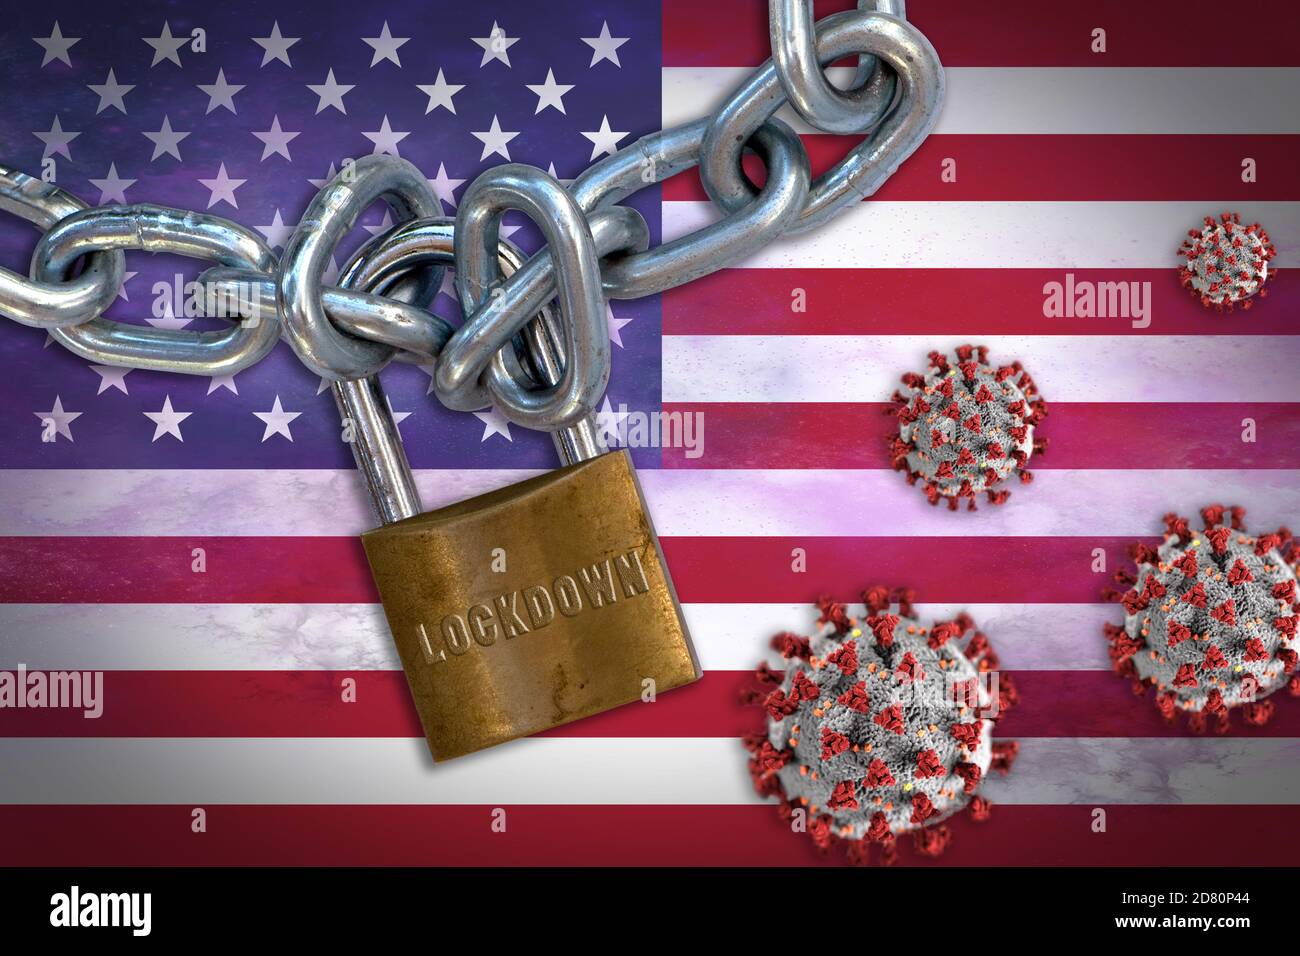 Concept of Coronavirus lockdown in the United States, USA, with Covid-19 particles overshadowing flag of USA. Stock Photo